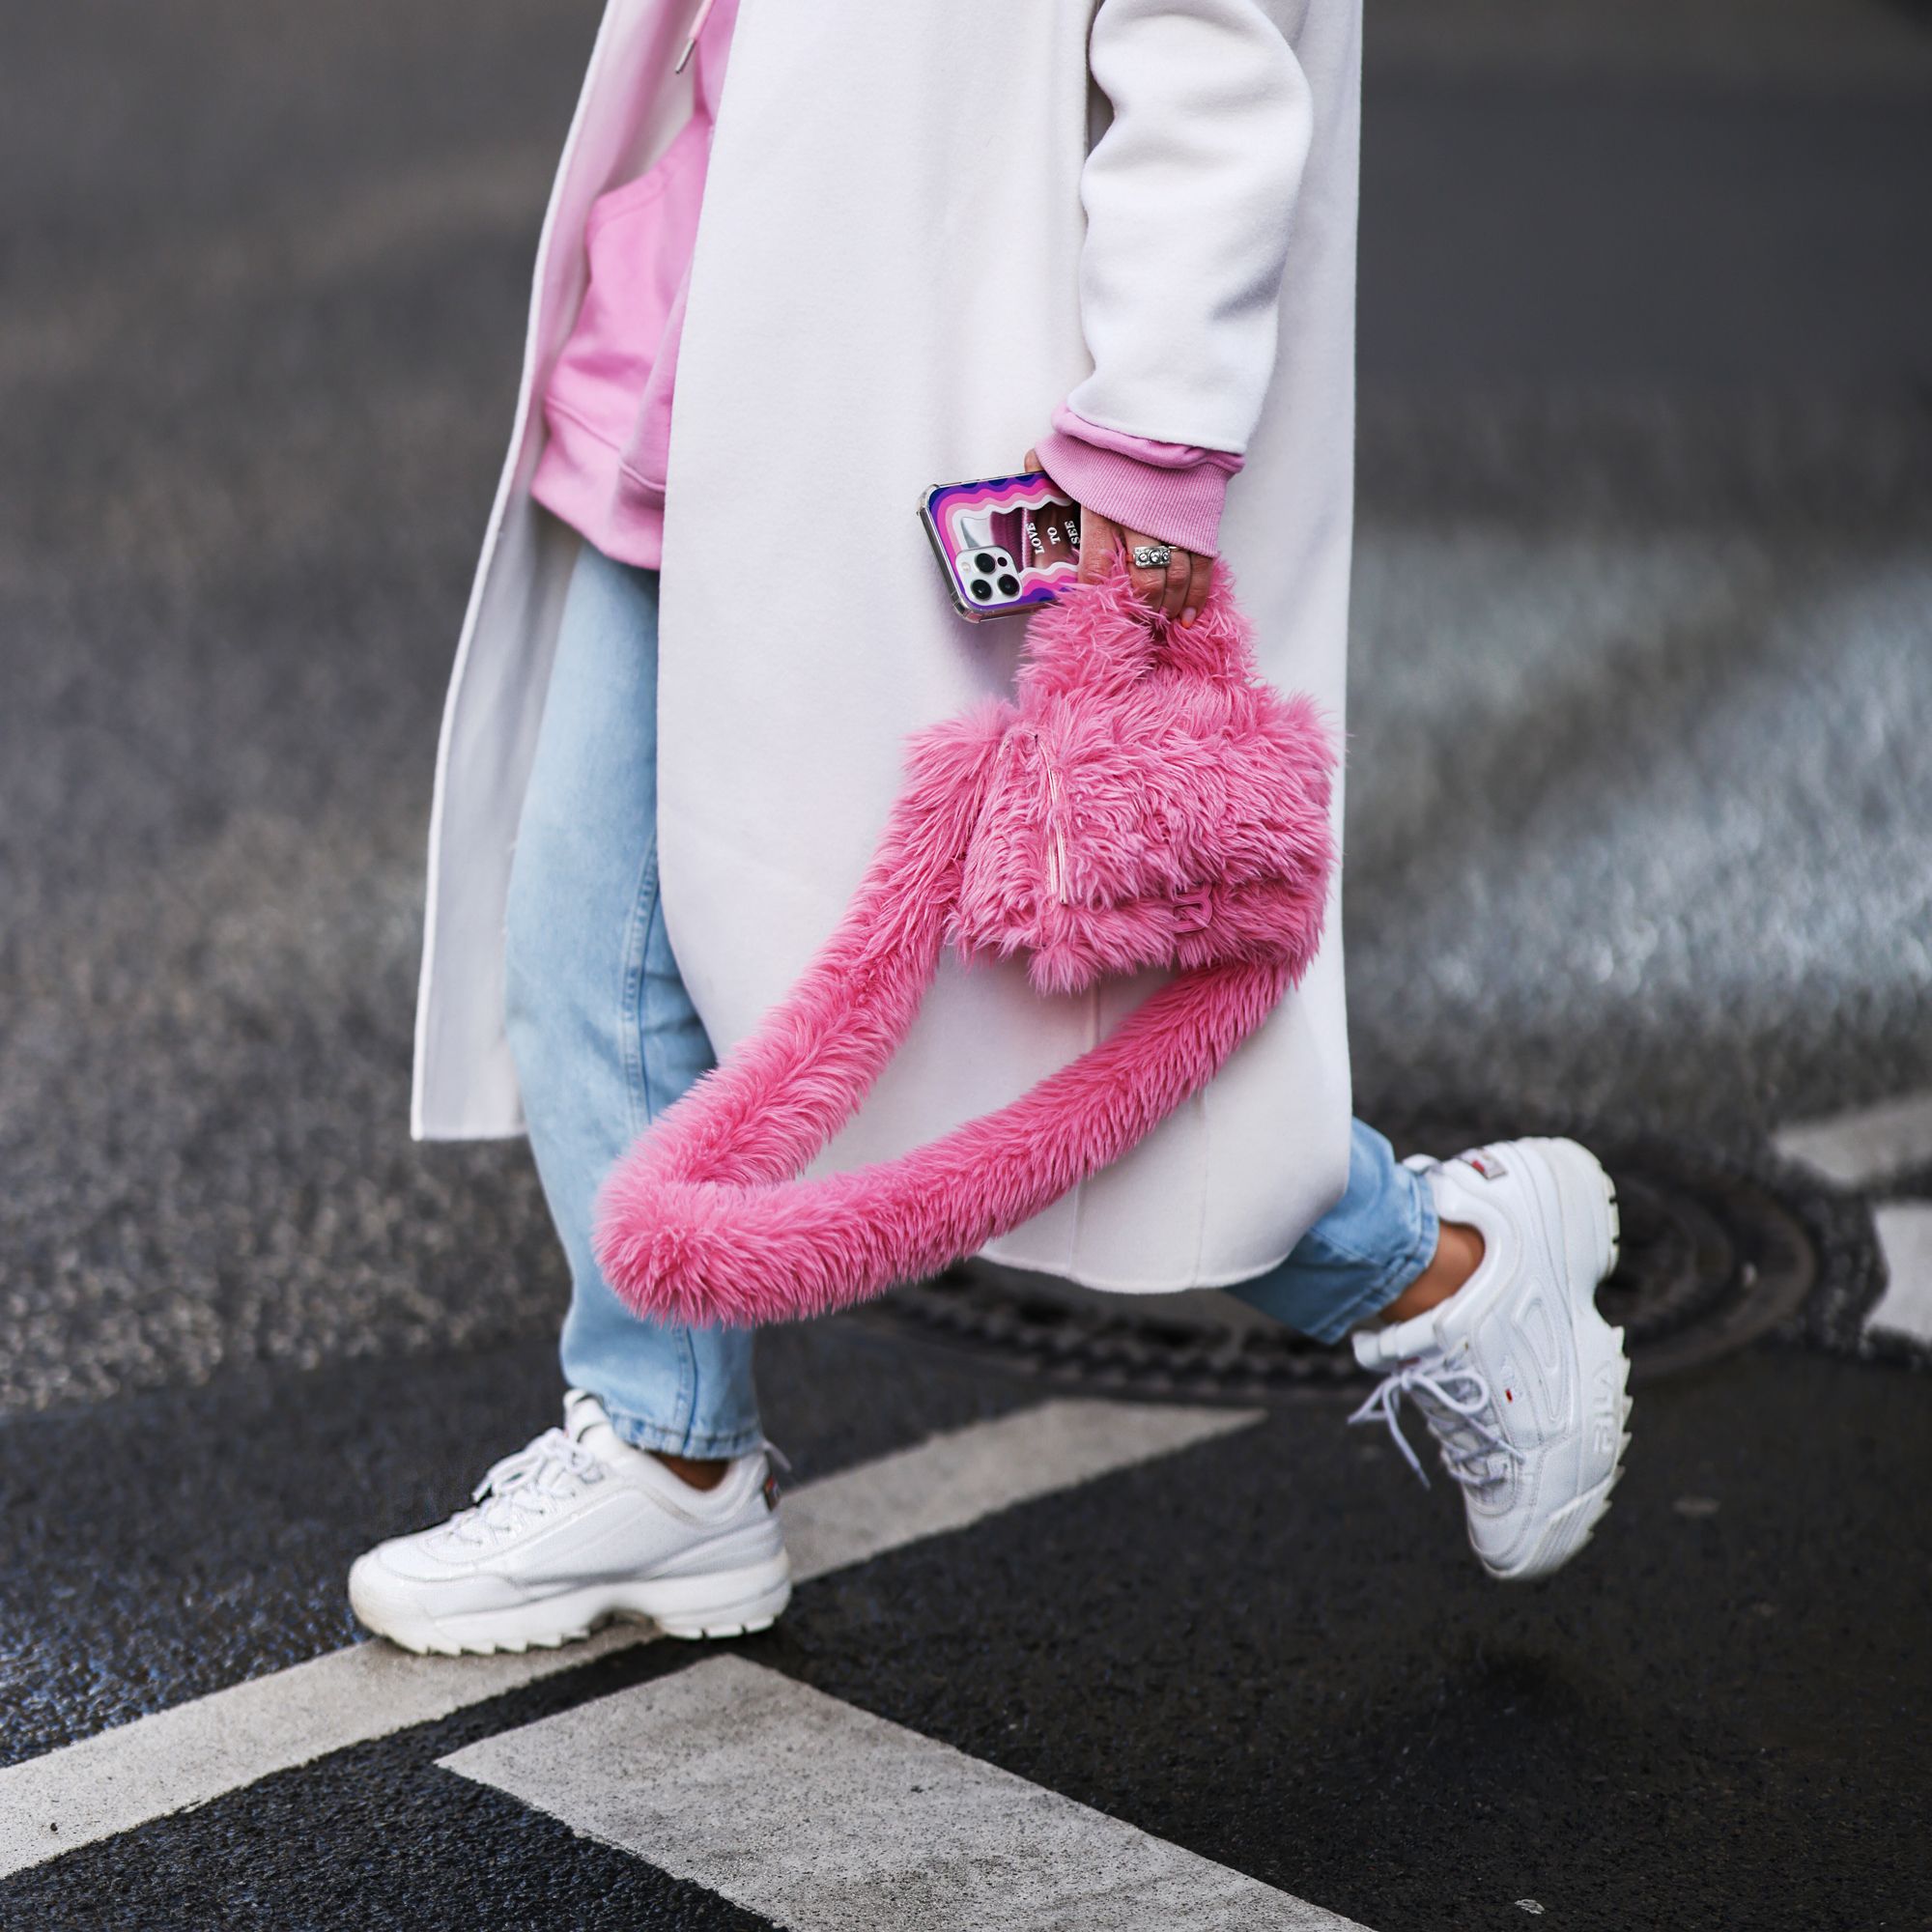 10 chic ways to wear your white sneakers with style | You